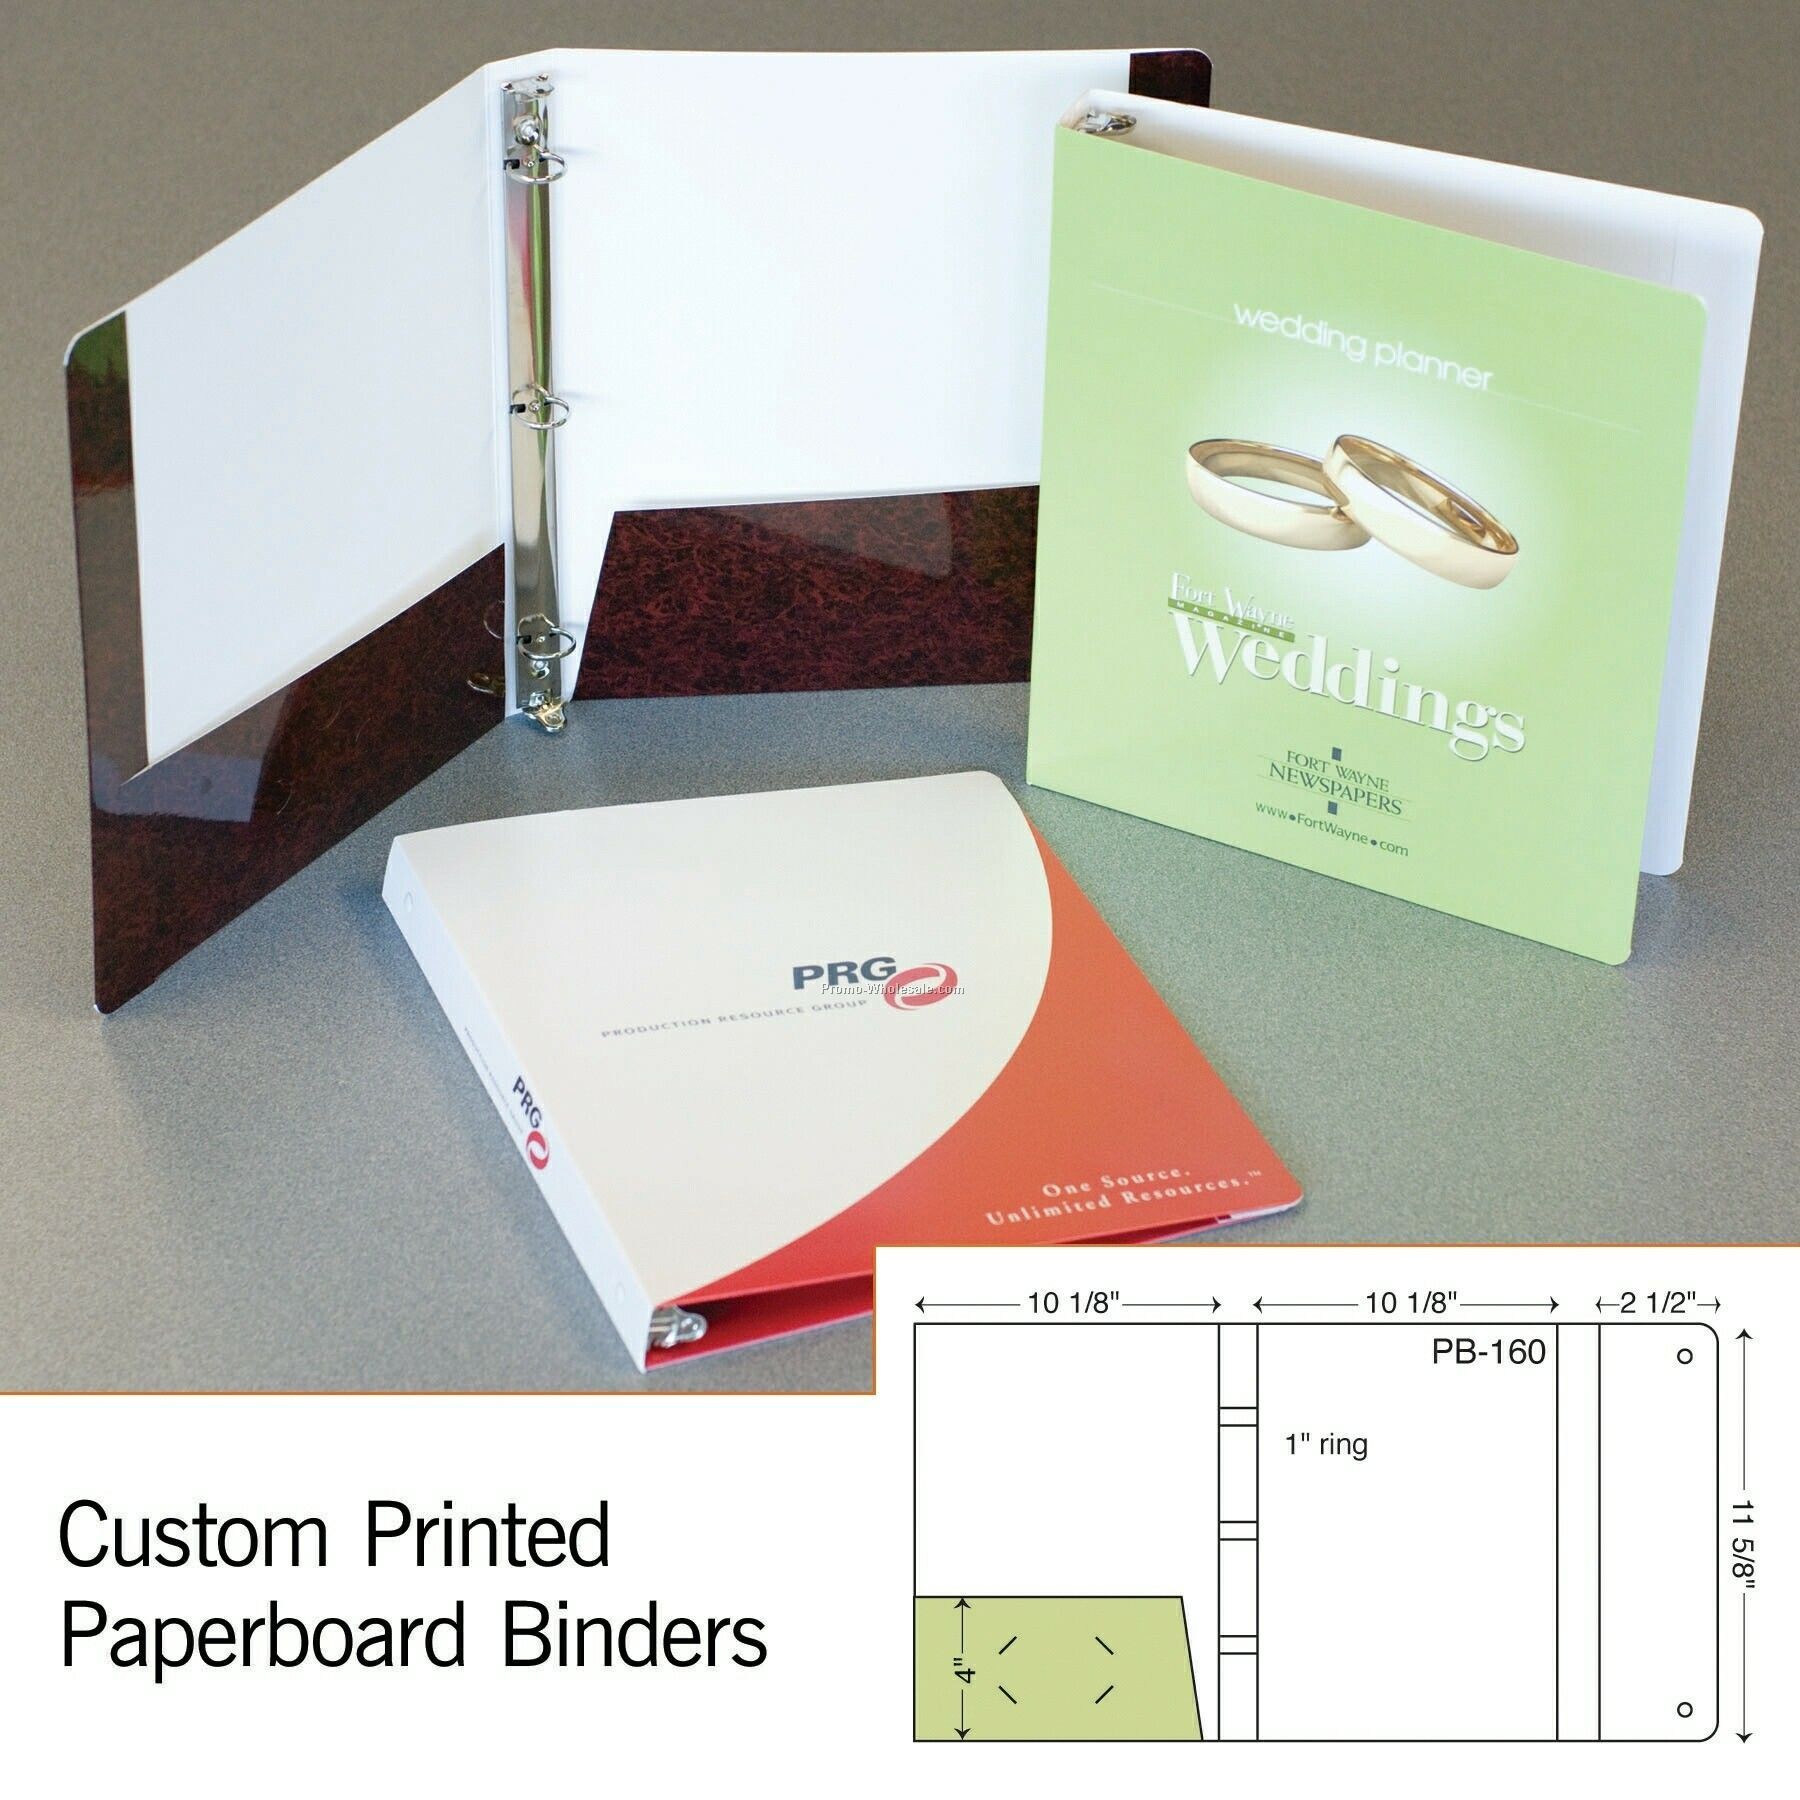 11-5/8"x9-3/4" Laminated 3-ring Binder W/ Reinforced Side (Stamp/Emboss)